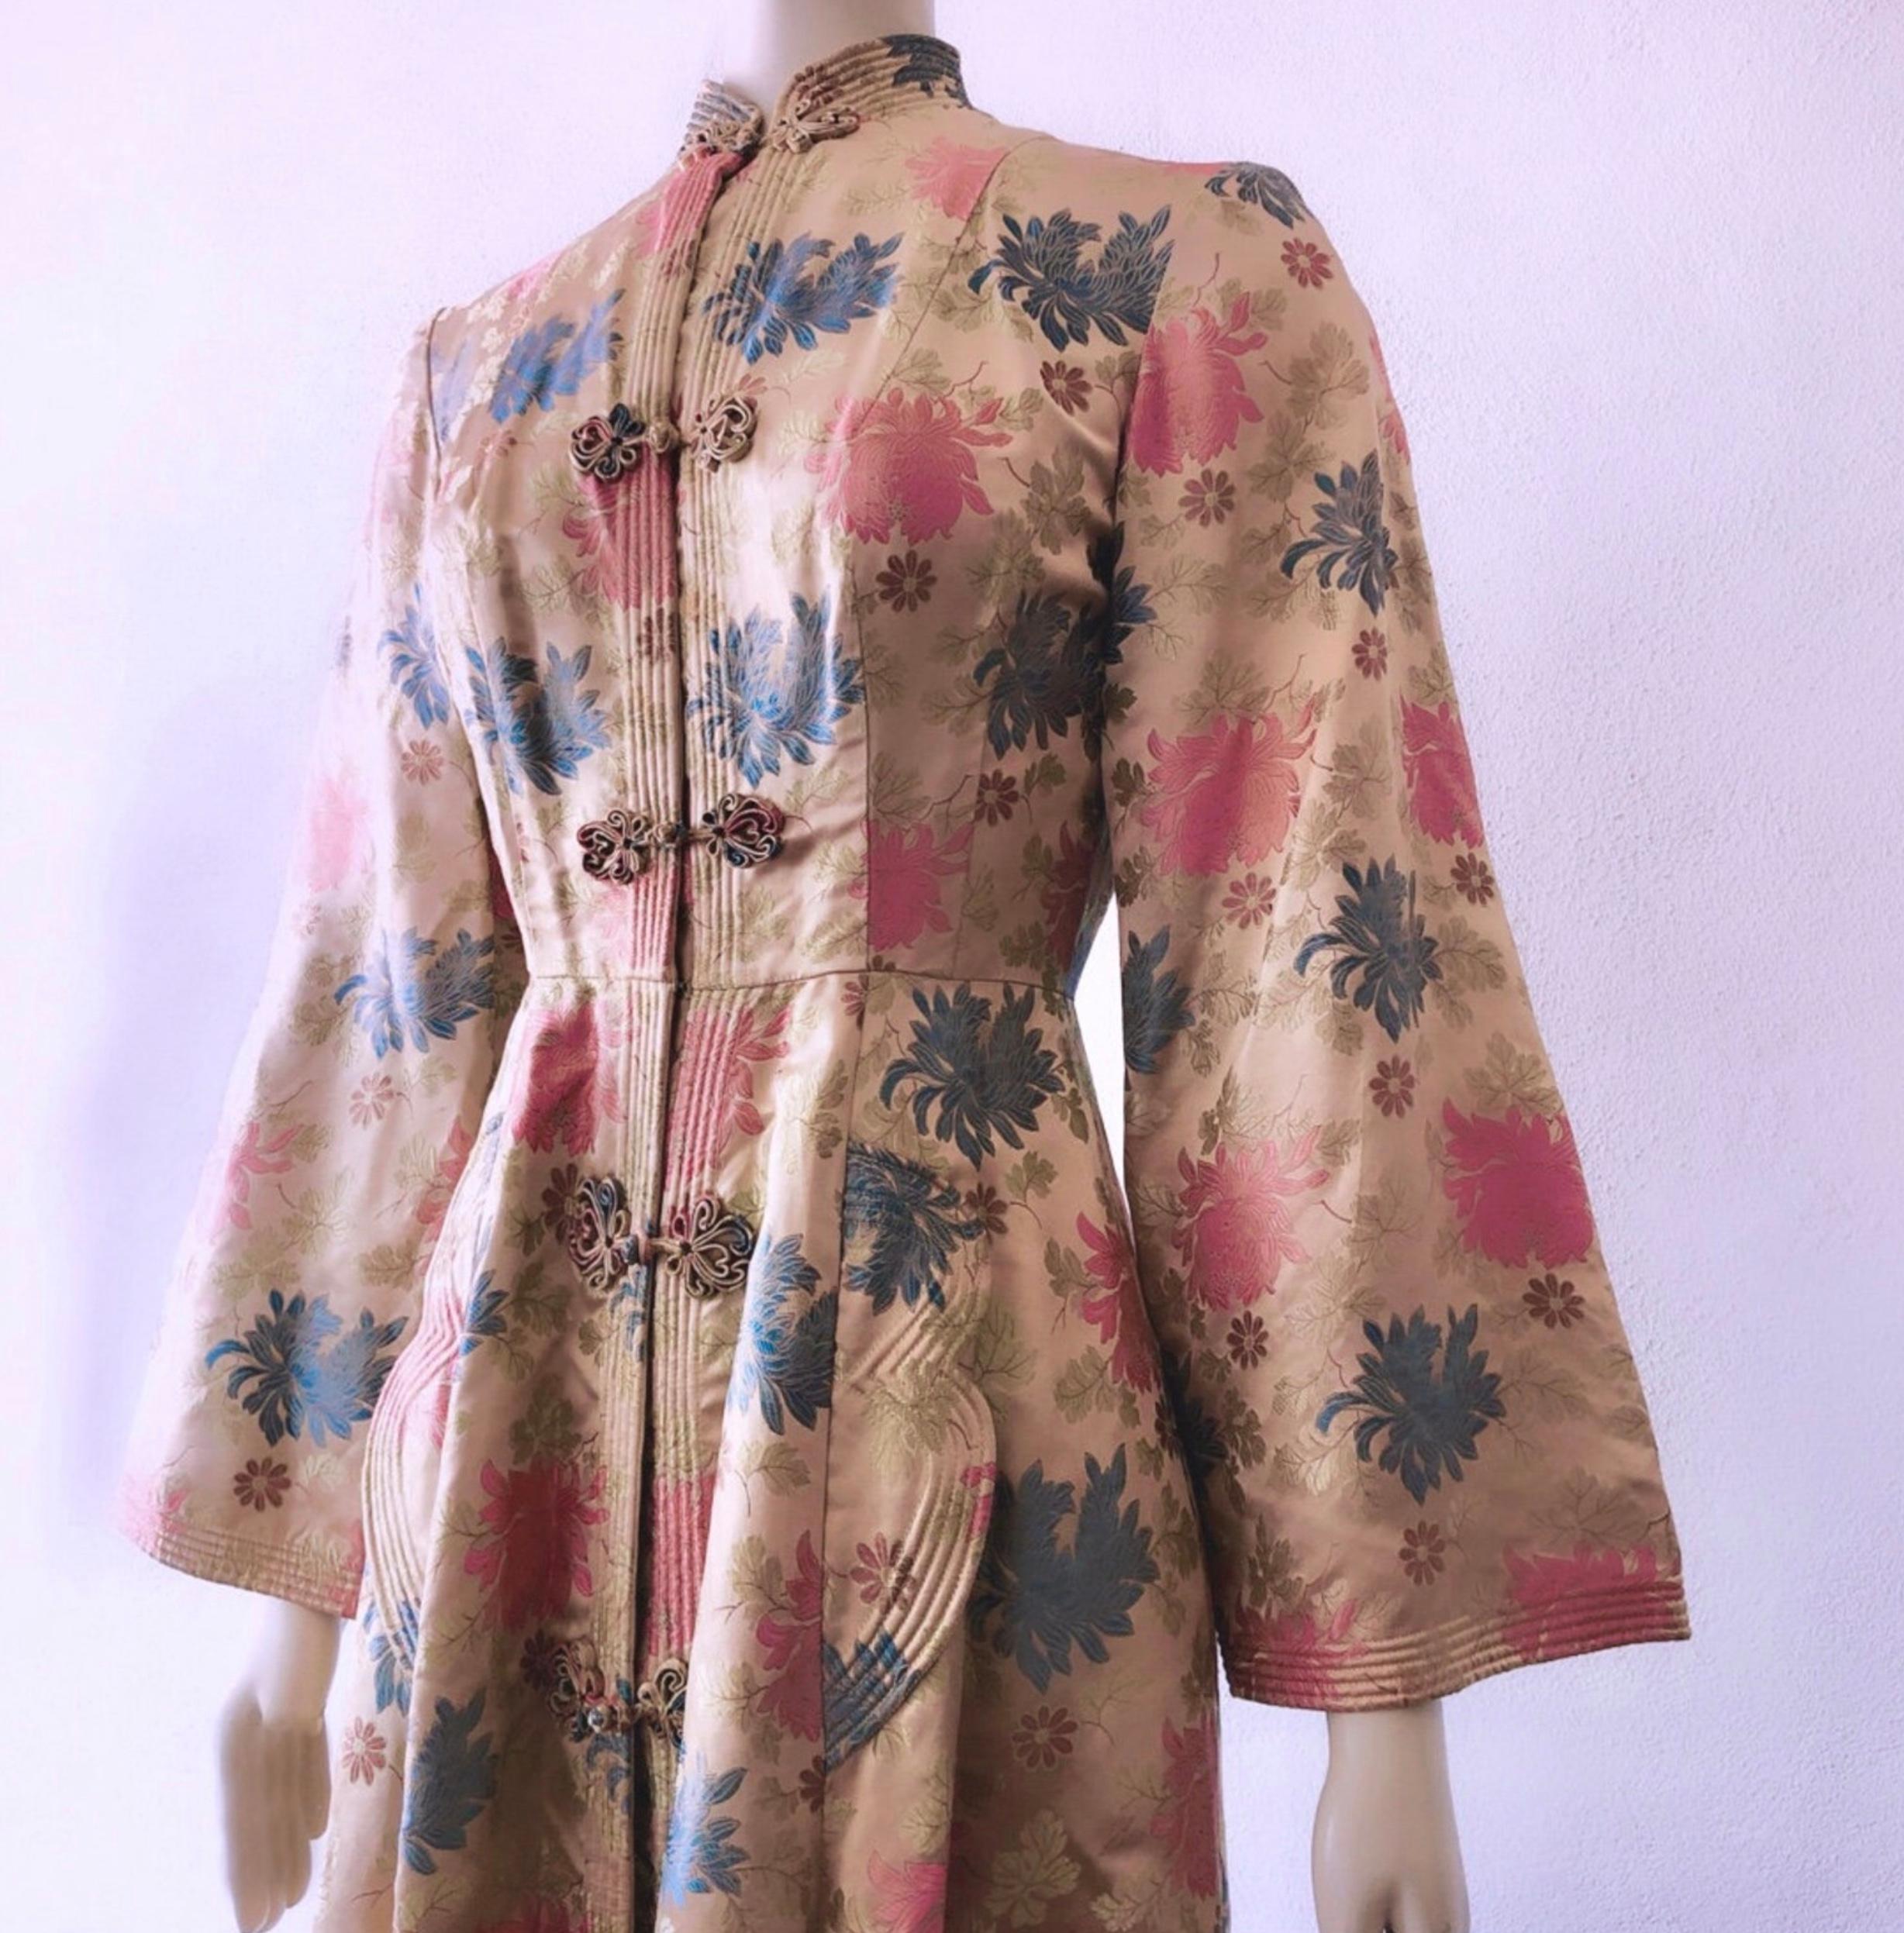 Gray Beautiful Vintage Silk Kimono Dress Gown 1950s Couture Asian Robe Coat 40s 50s For Sale